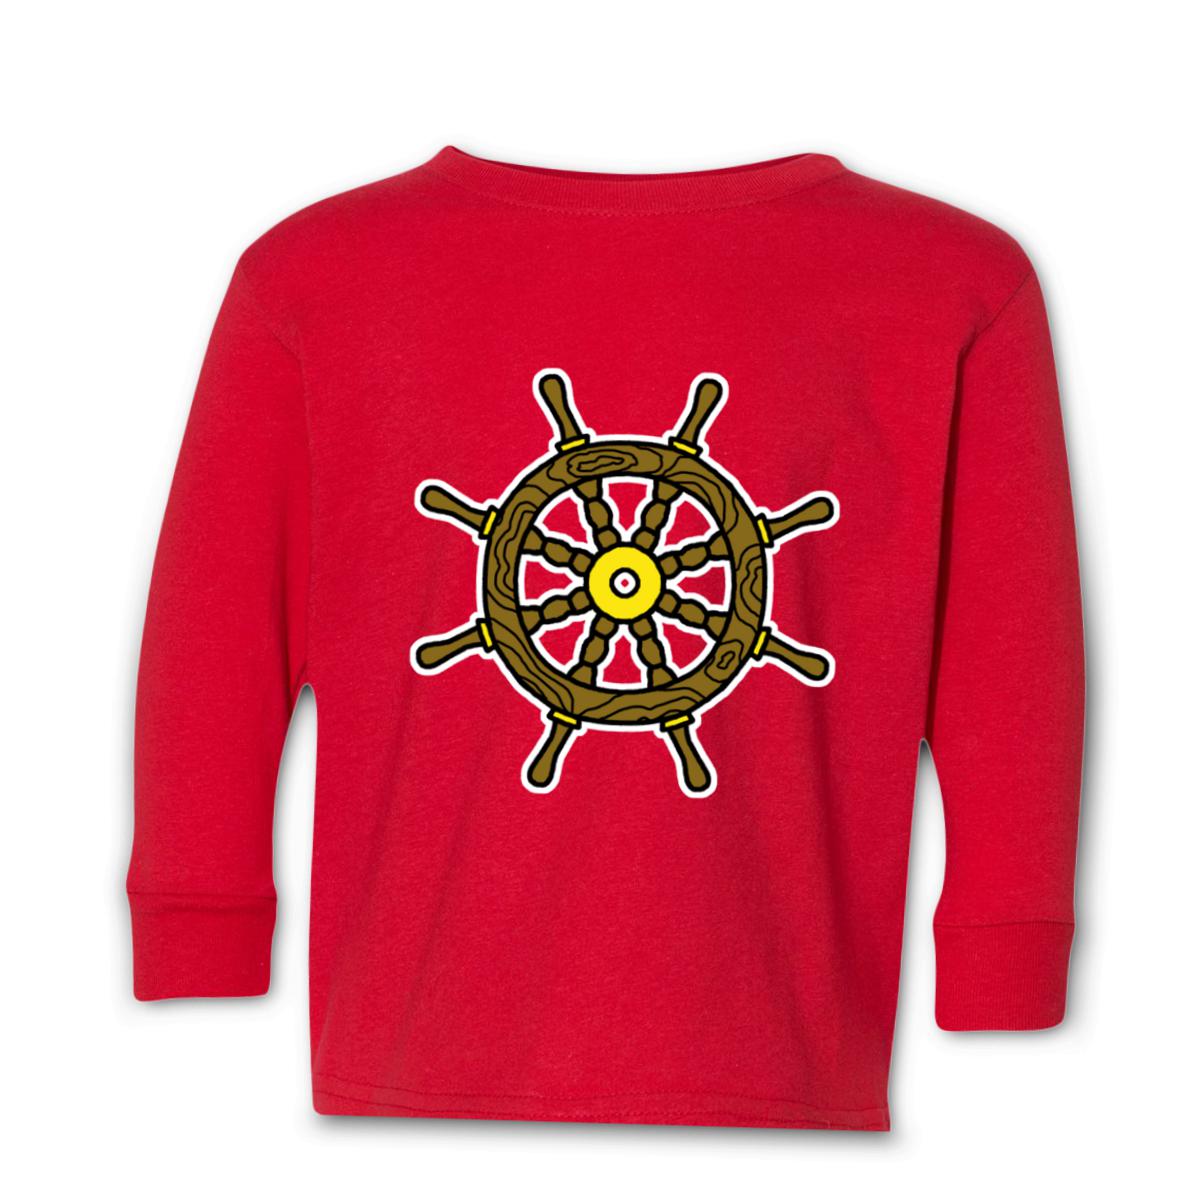 American Traditional Ship Wheel Toddler Long Sleeve Tee 2T red